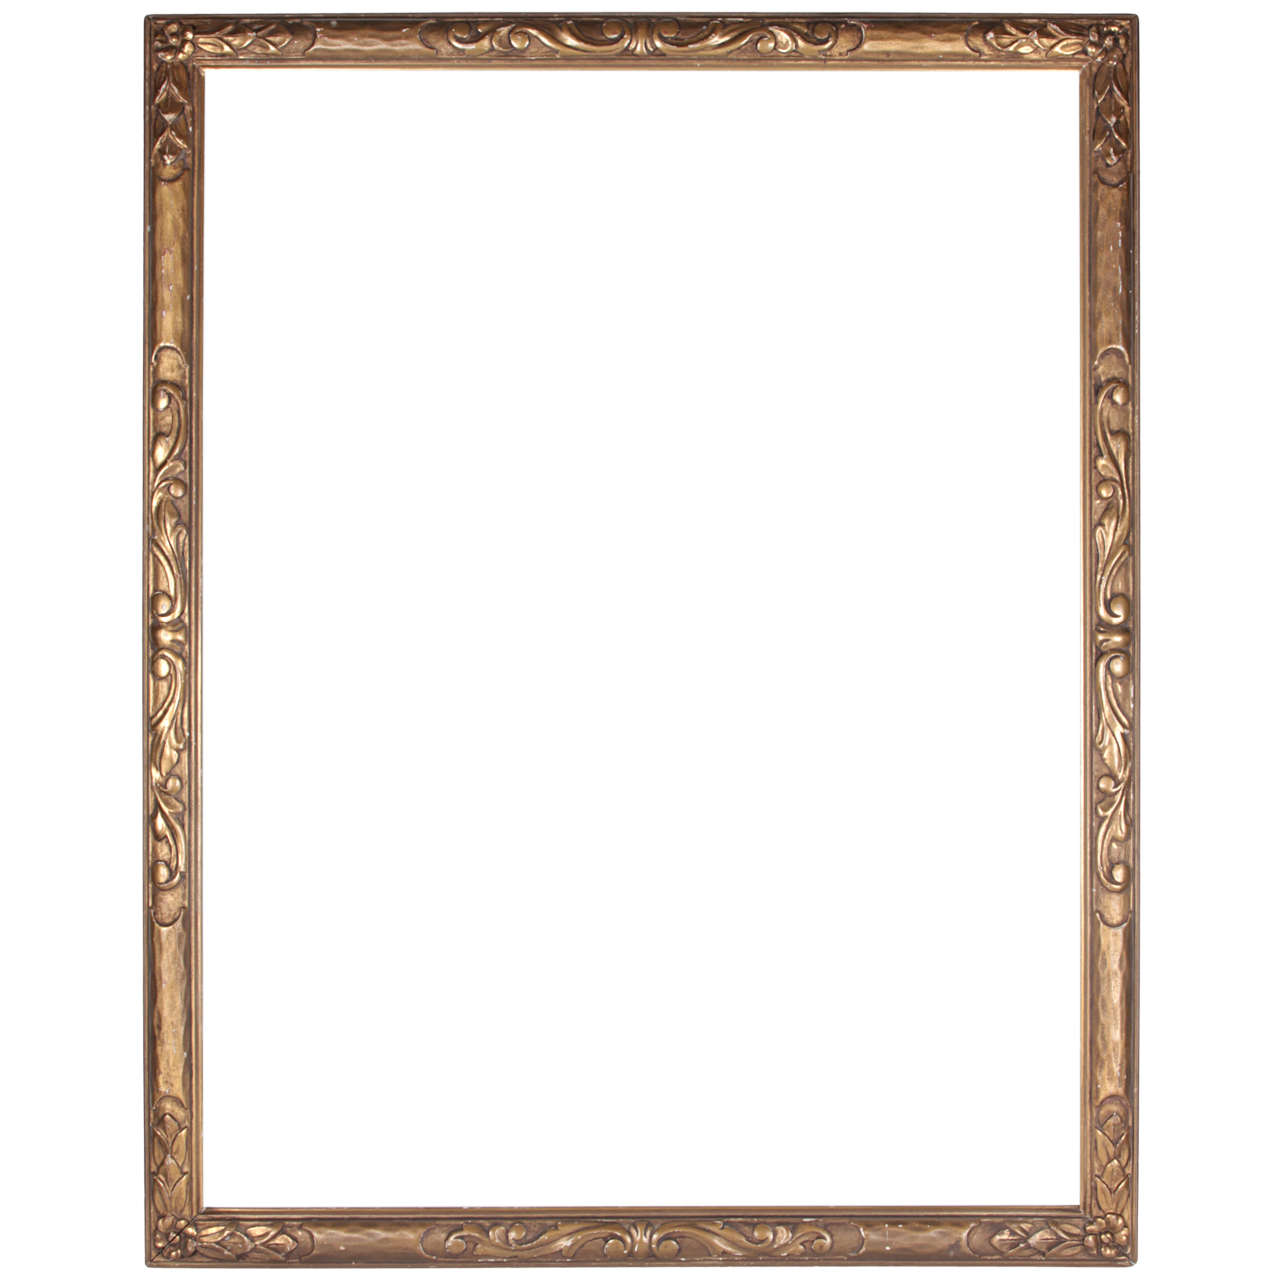 Carved and Gilded Arts & Crafts Era Frame, by Foster Bros. For Sale